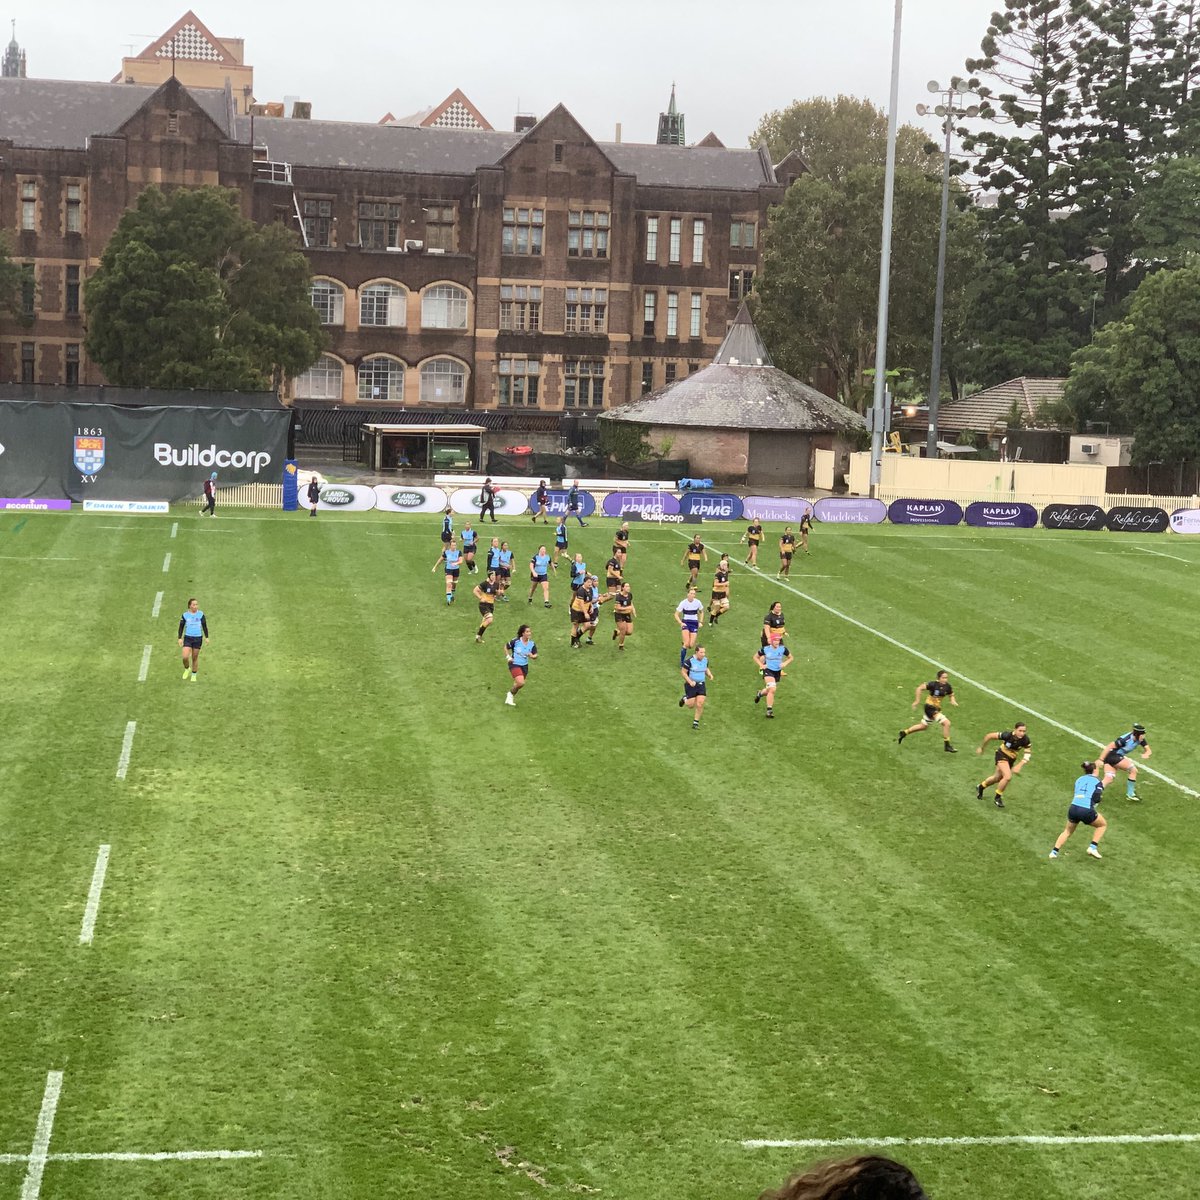 NSWWaratah women on their way to scoring their second try against Rugby WA women on a wet day at Sydney Uni Oval 2. 10-0 to NSW